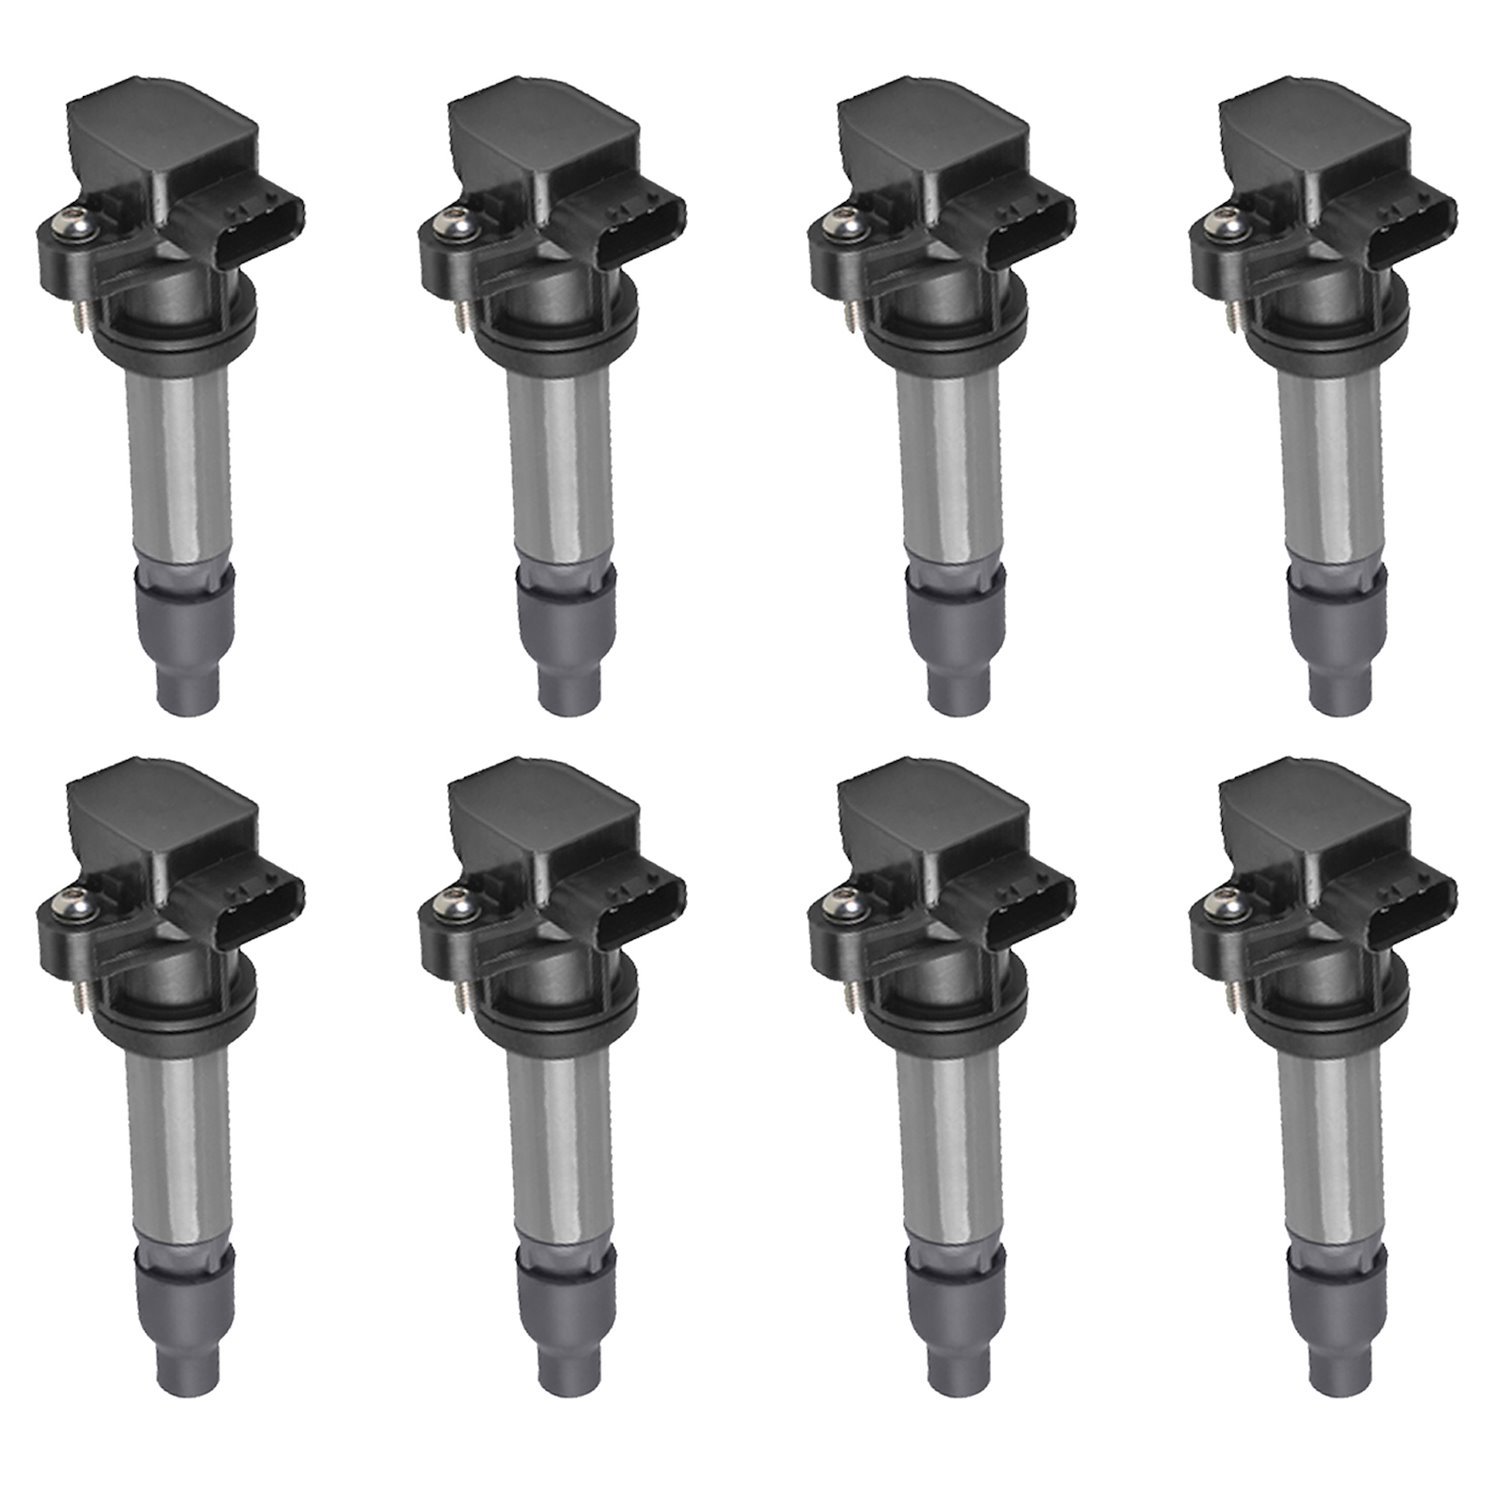 OE Replacement Ignition Coils for Buick Lucerne Cadillac